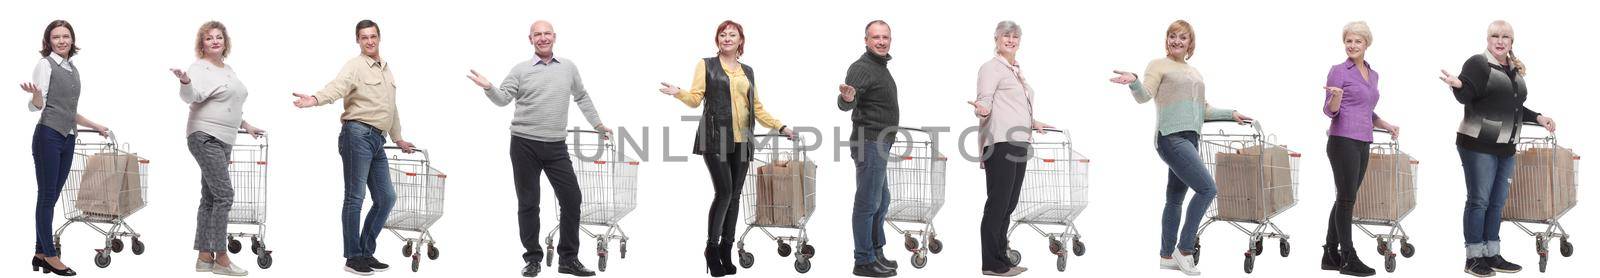 group of people with cart and outstretched hand by asdf